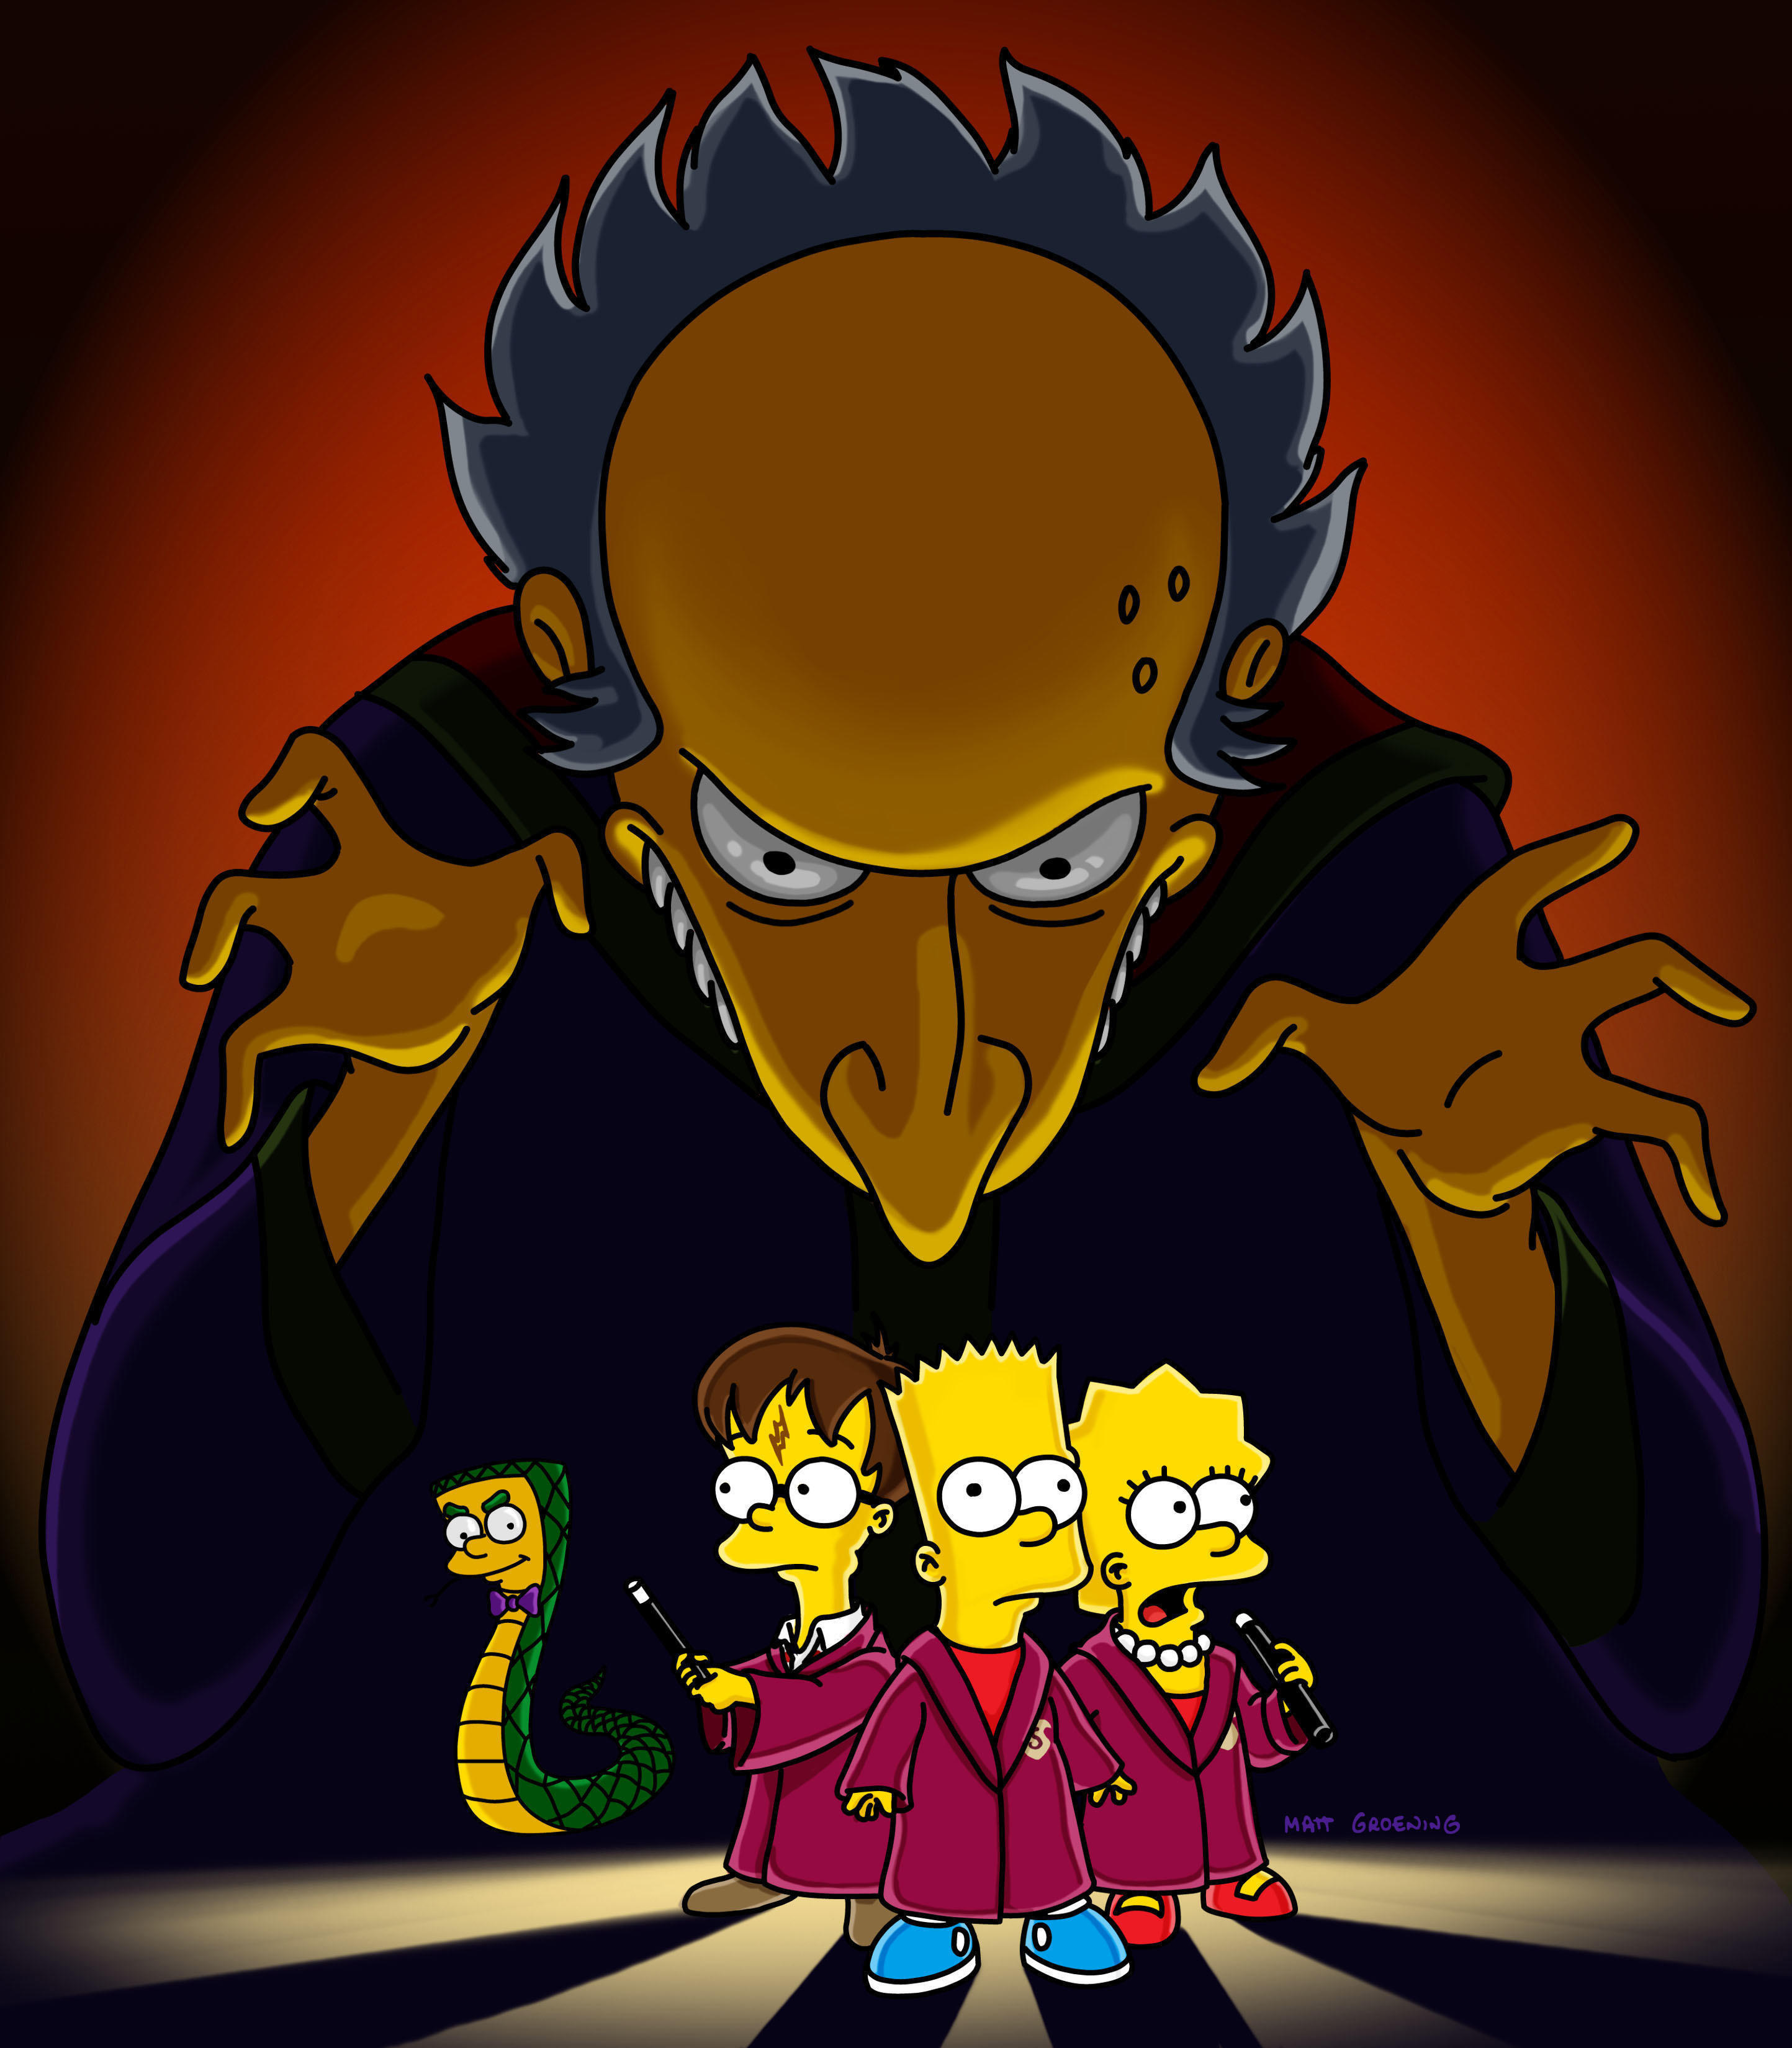 The Simpsons mix with Harry Potter in this promotional art.